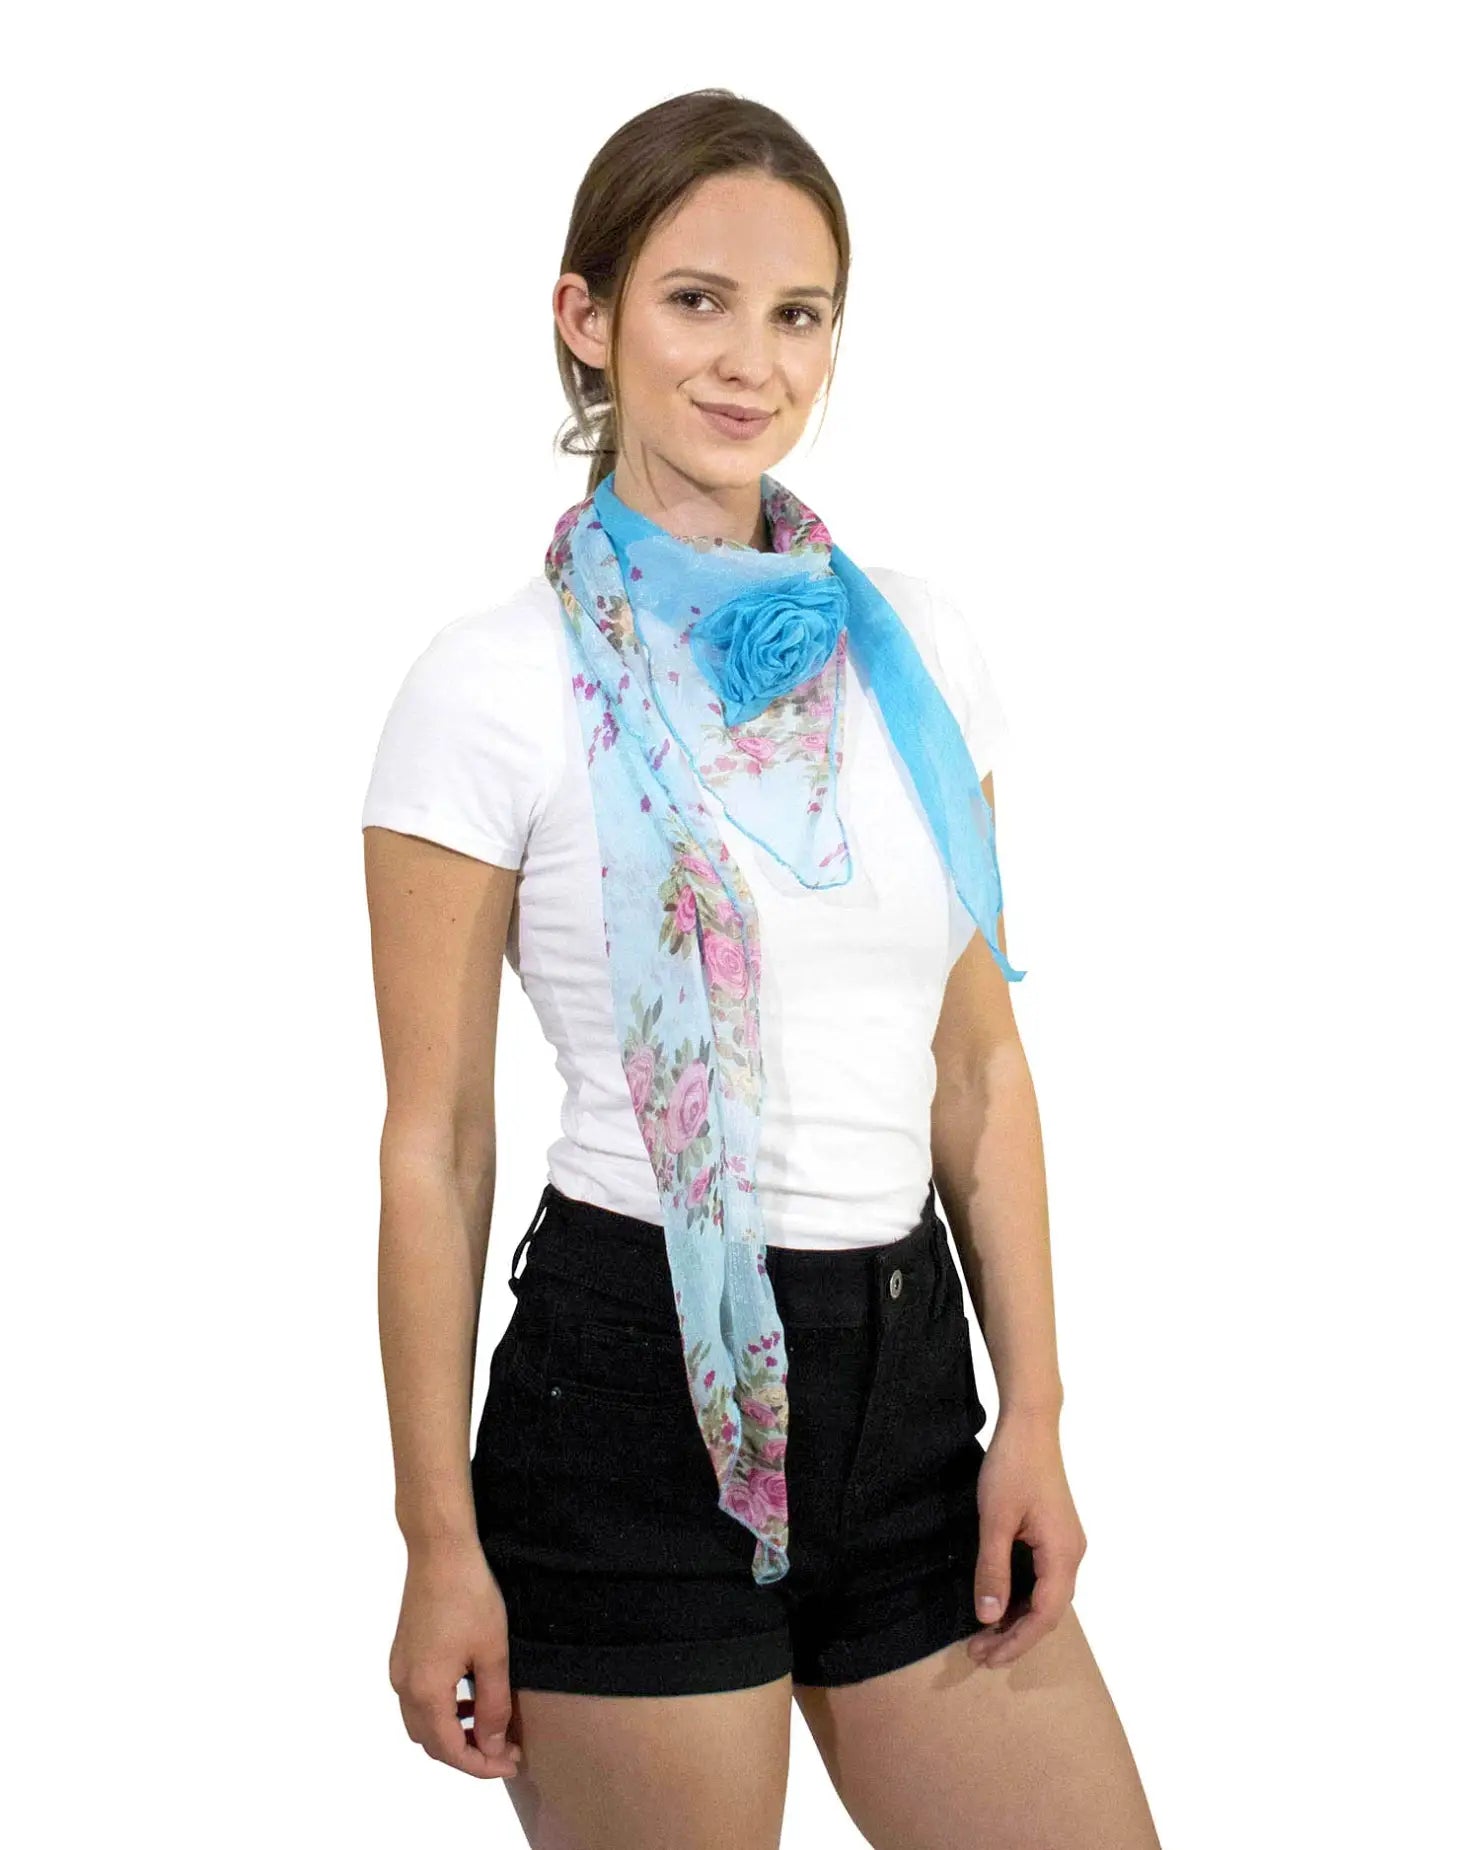 Woman wearing Elegant Floral Print Chiffon Scarf with Pink Flowers